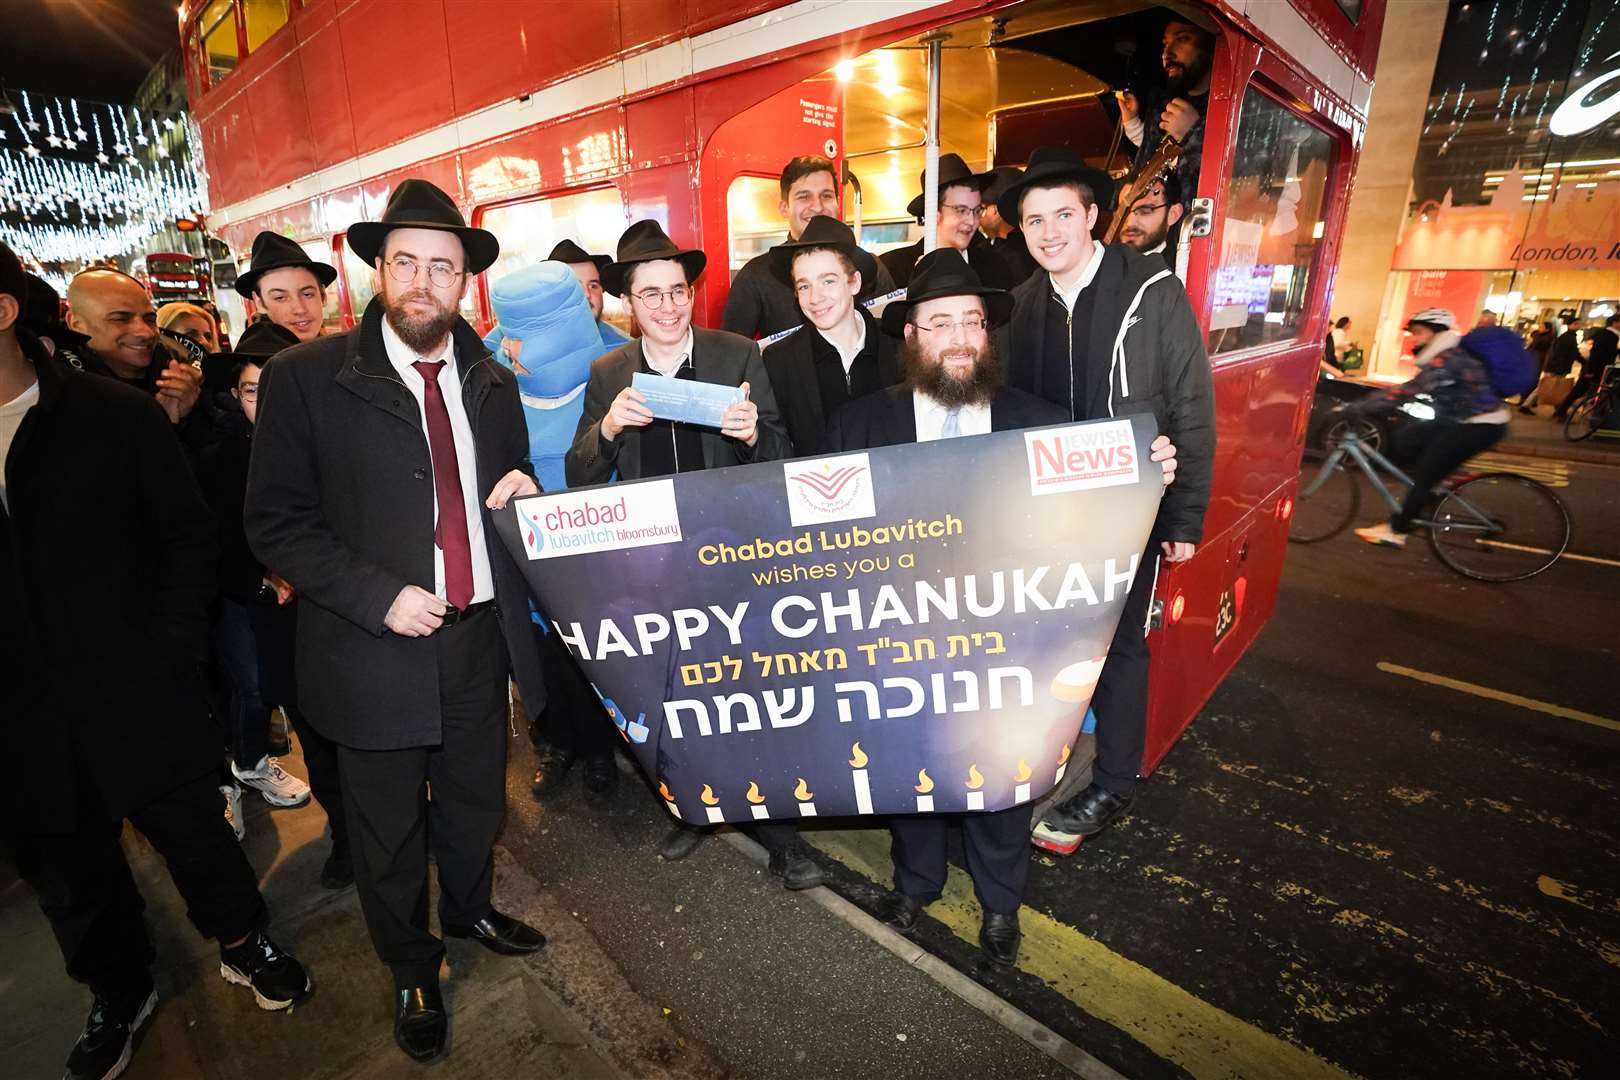 Rabbi Yisroel Lew said the group wanted to demonstrate that the capital was a ‘welcoming place for Jews’ (James Manning/PA)